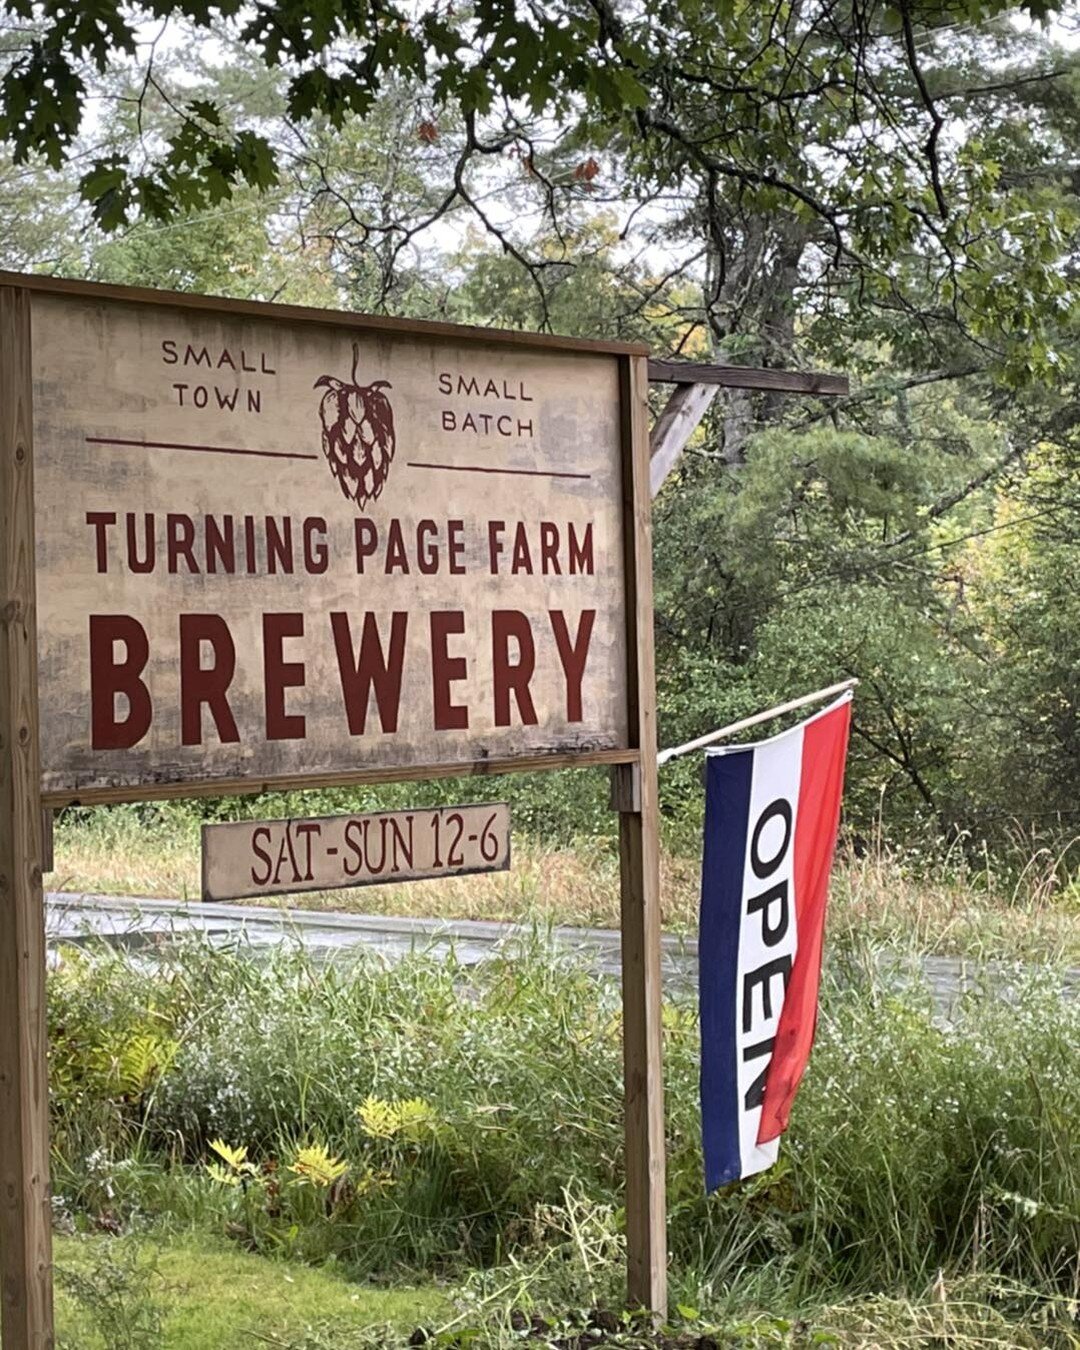 A diversion for a rainy afternoon- we took @Mary Lou Brown and @Richard Brown on a ride up to Monson and visited with our friends Tim and Joy for a bit at their Turning Page Farm. They have a really great little goat farm and brewery experience. We h